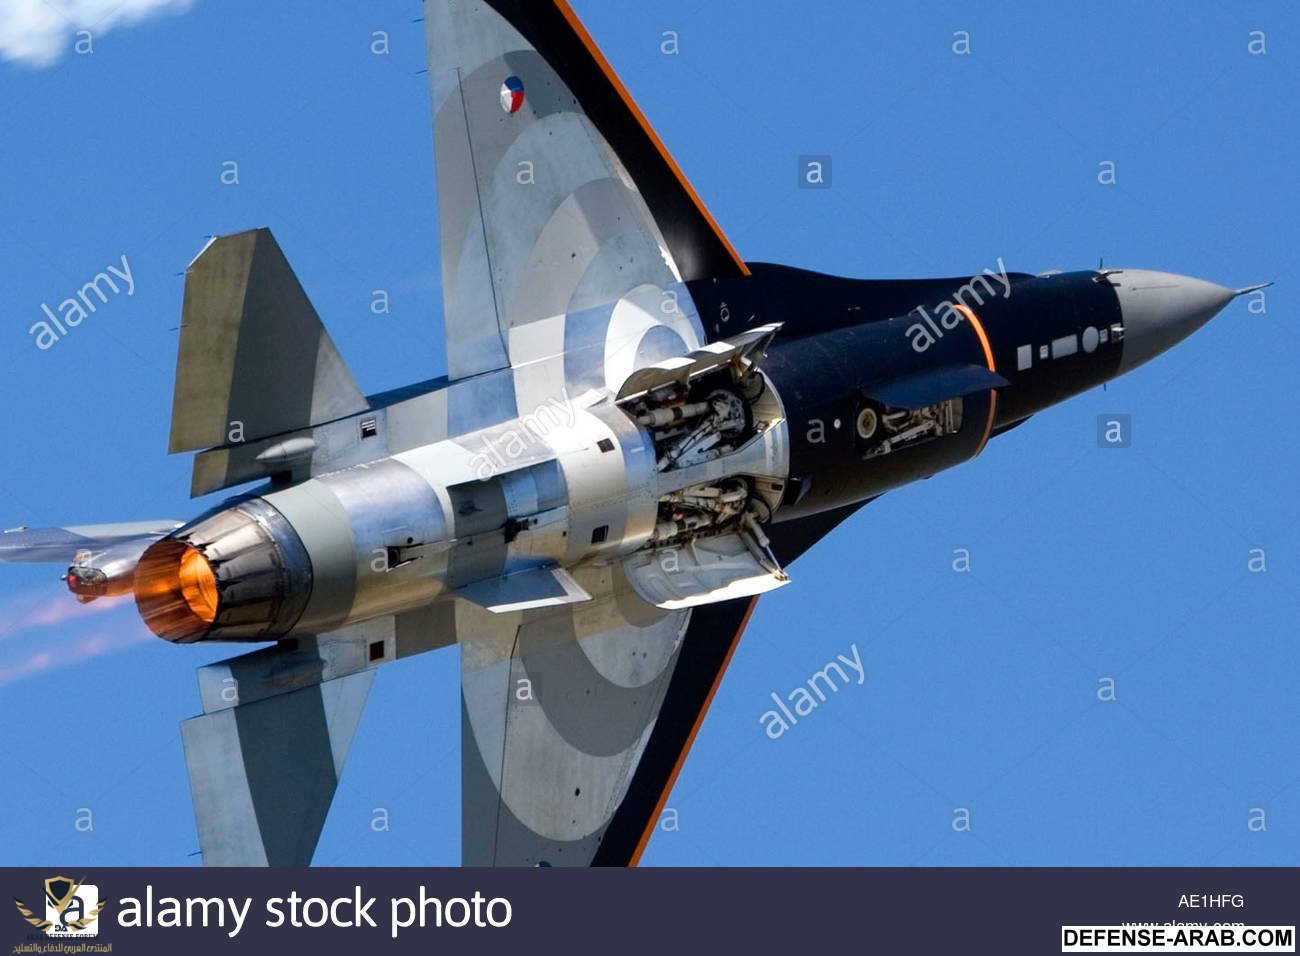 dutch-f16-fighting-falcon-delta-wing-jet-fighter-with-afterburner-AE1HFG.jpg